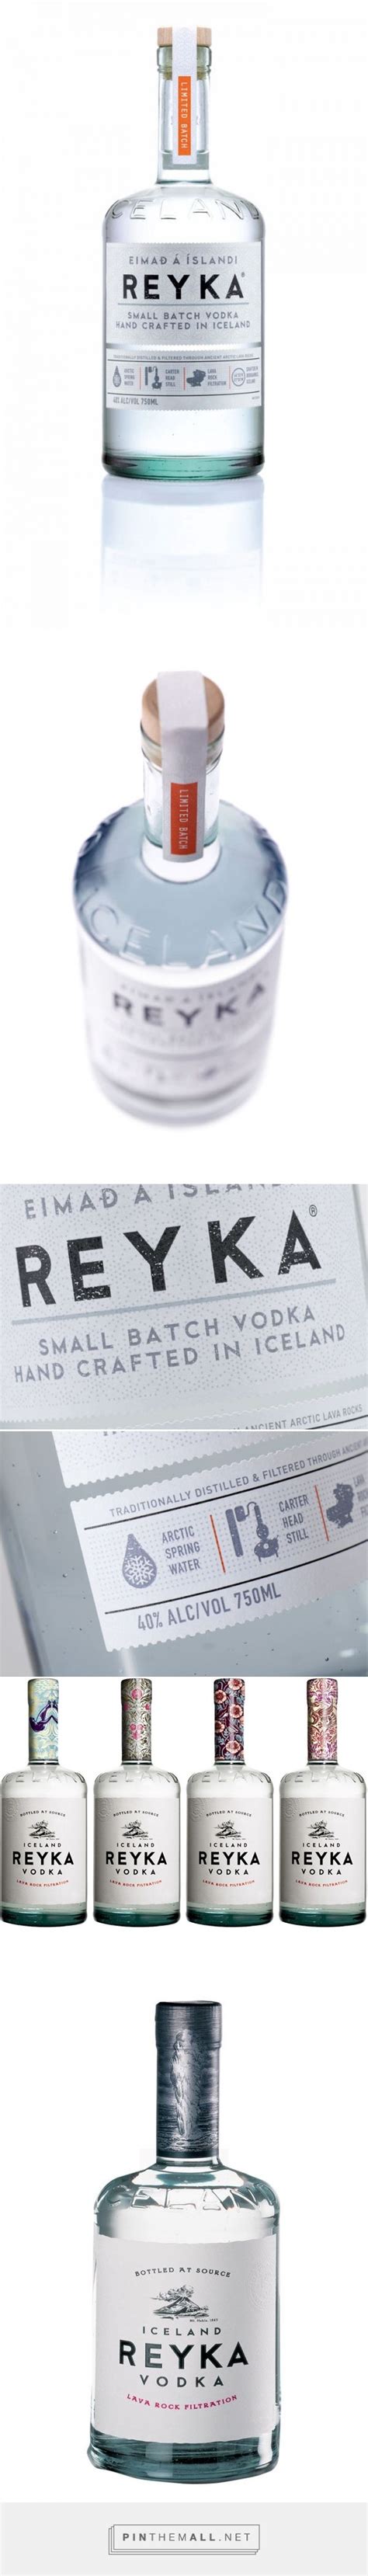 Before And After Reyka — The Dieline Branding And Packaging A